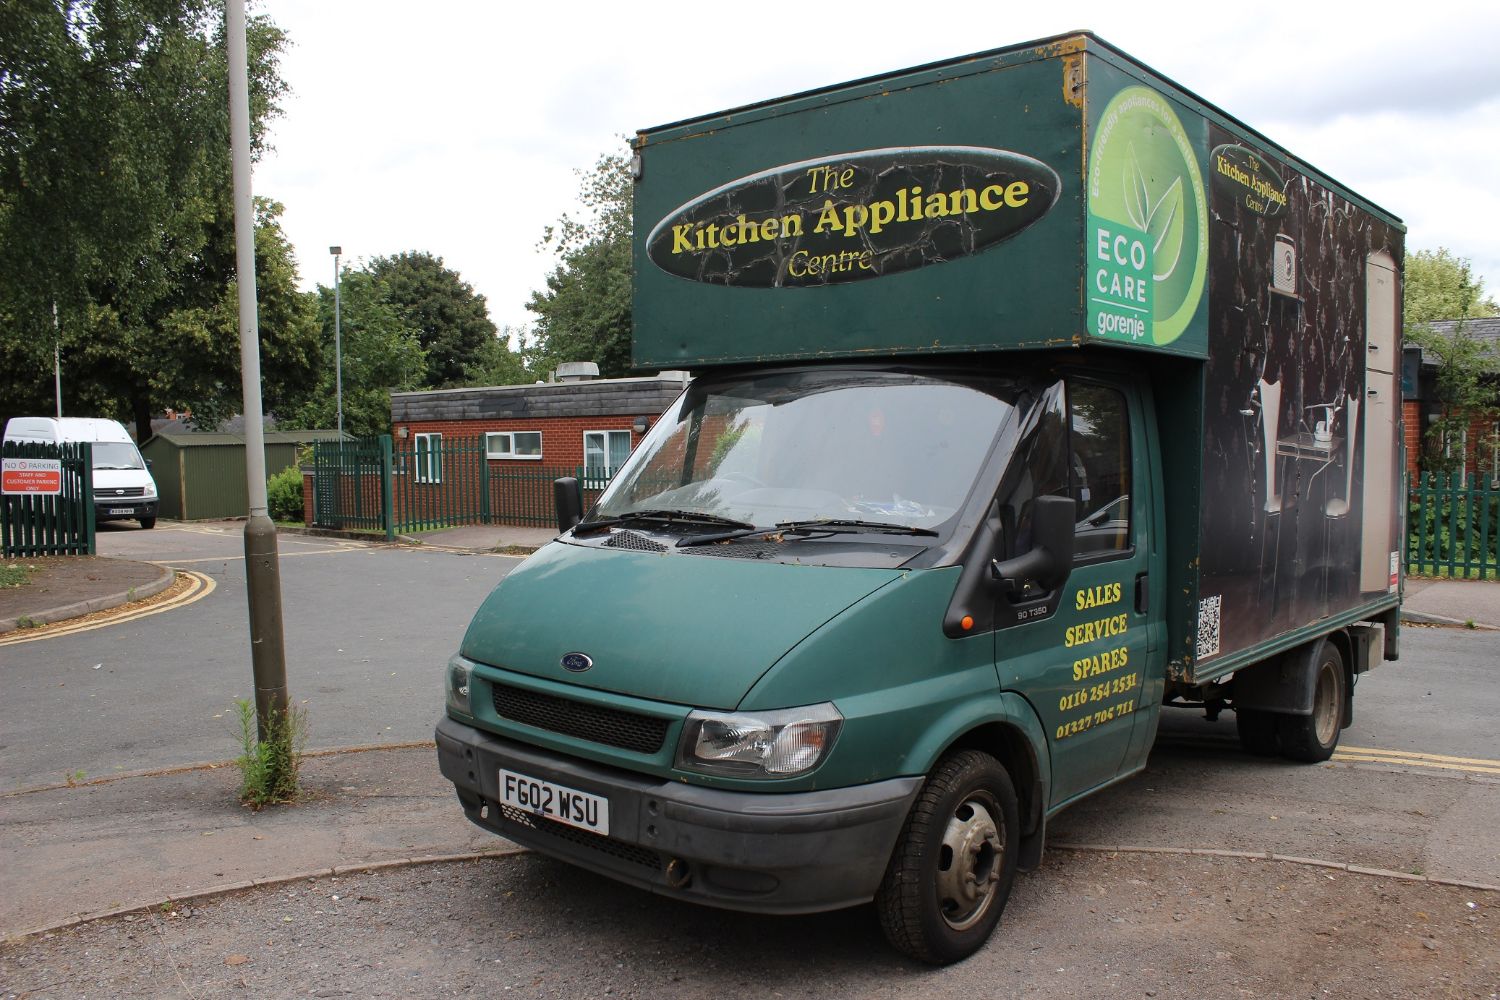 Contents of Two Kitchen & Household Appliance Retailers – Sale 2 (Leicester)